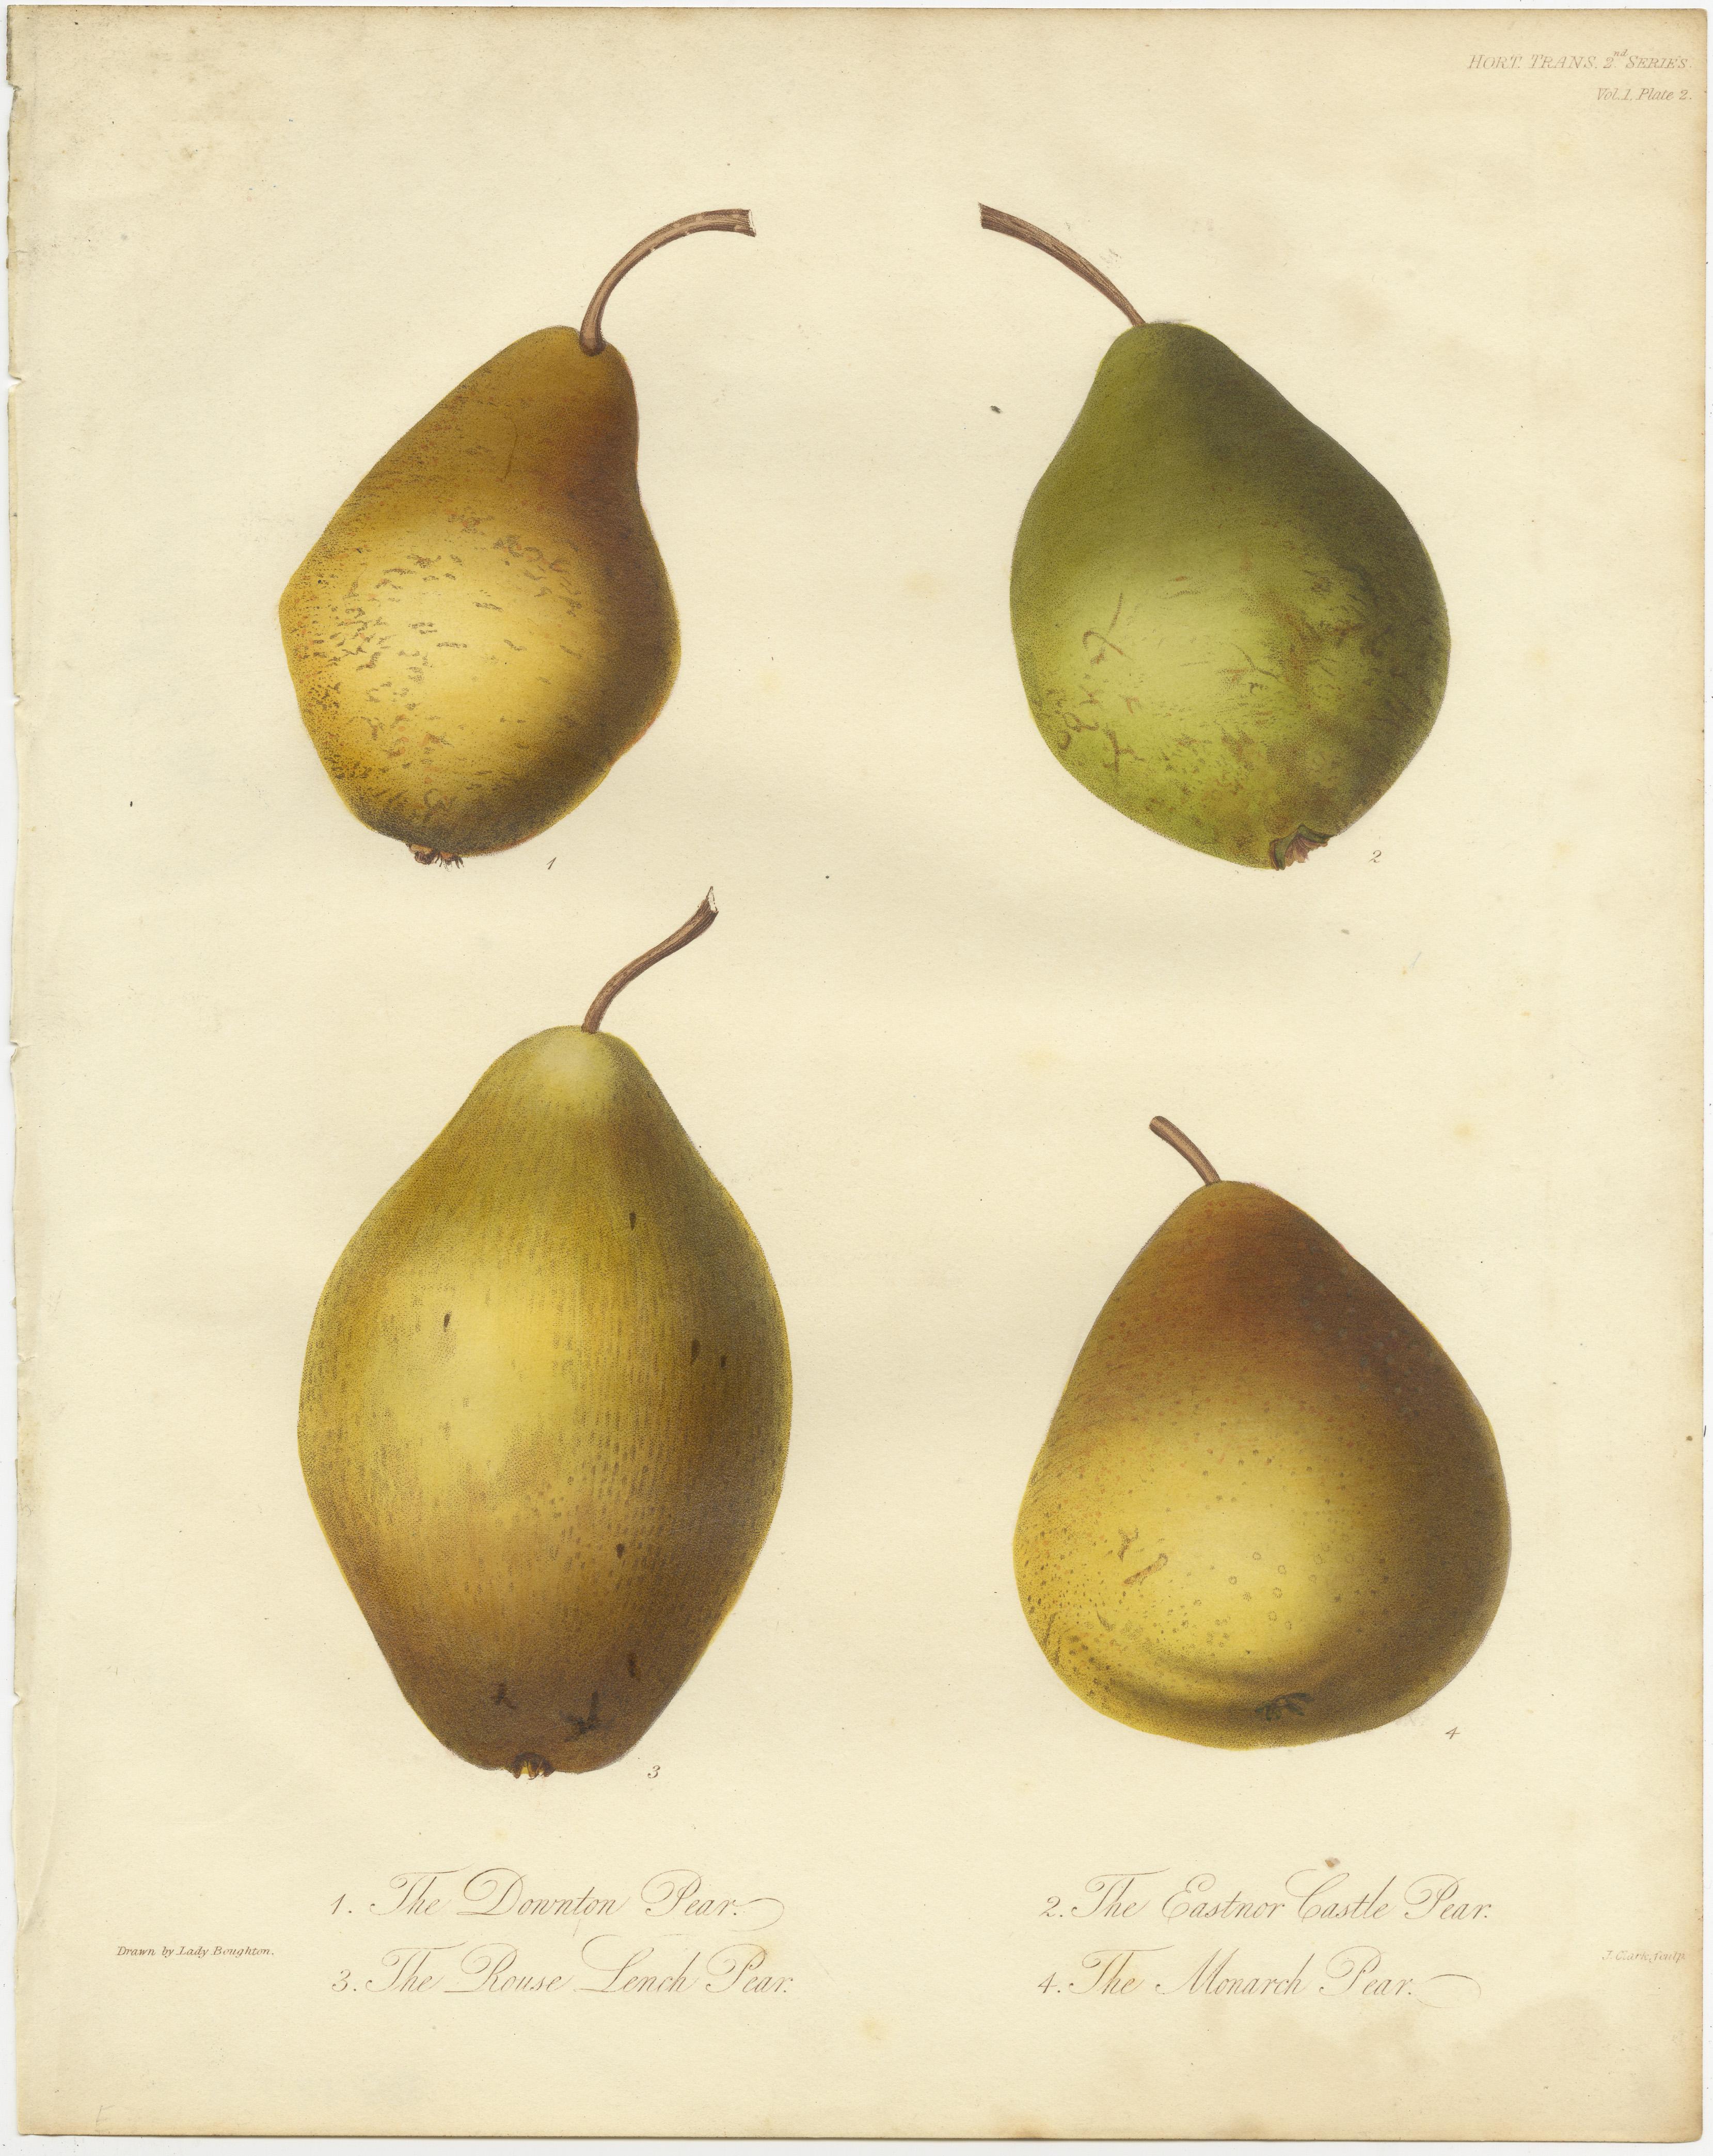 Set of 2 antique prints of various pears and apples. It shows the Downton Pear, Rouse Lench Pear, Eastnor Castle Pear, Monarch Pear, and the Malcarle or Charles Apple. These prints originate from 'Transactions of the Horticultural Society of London'